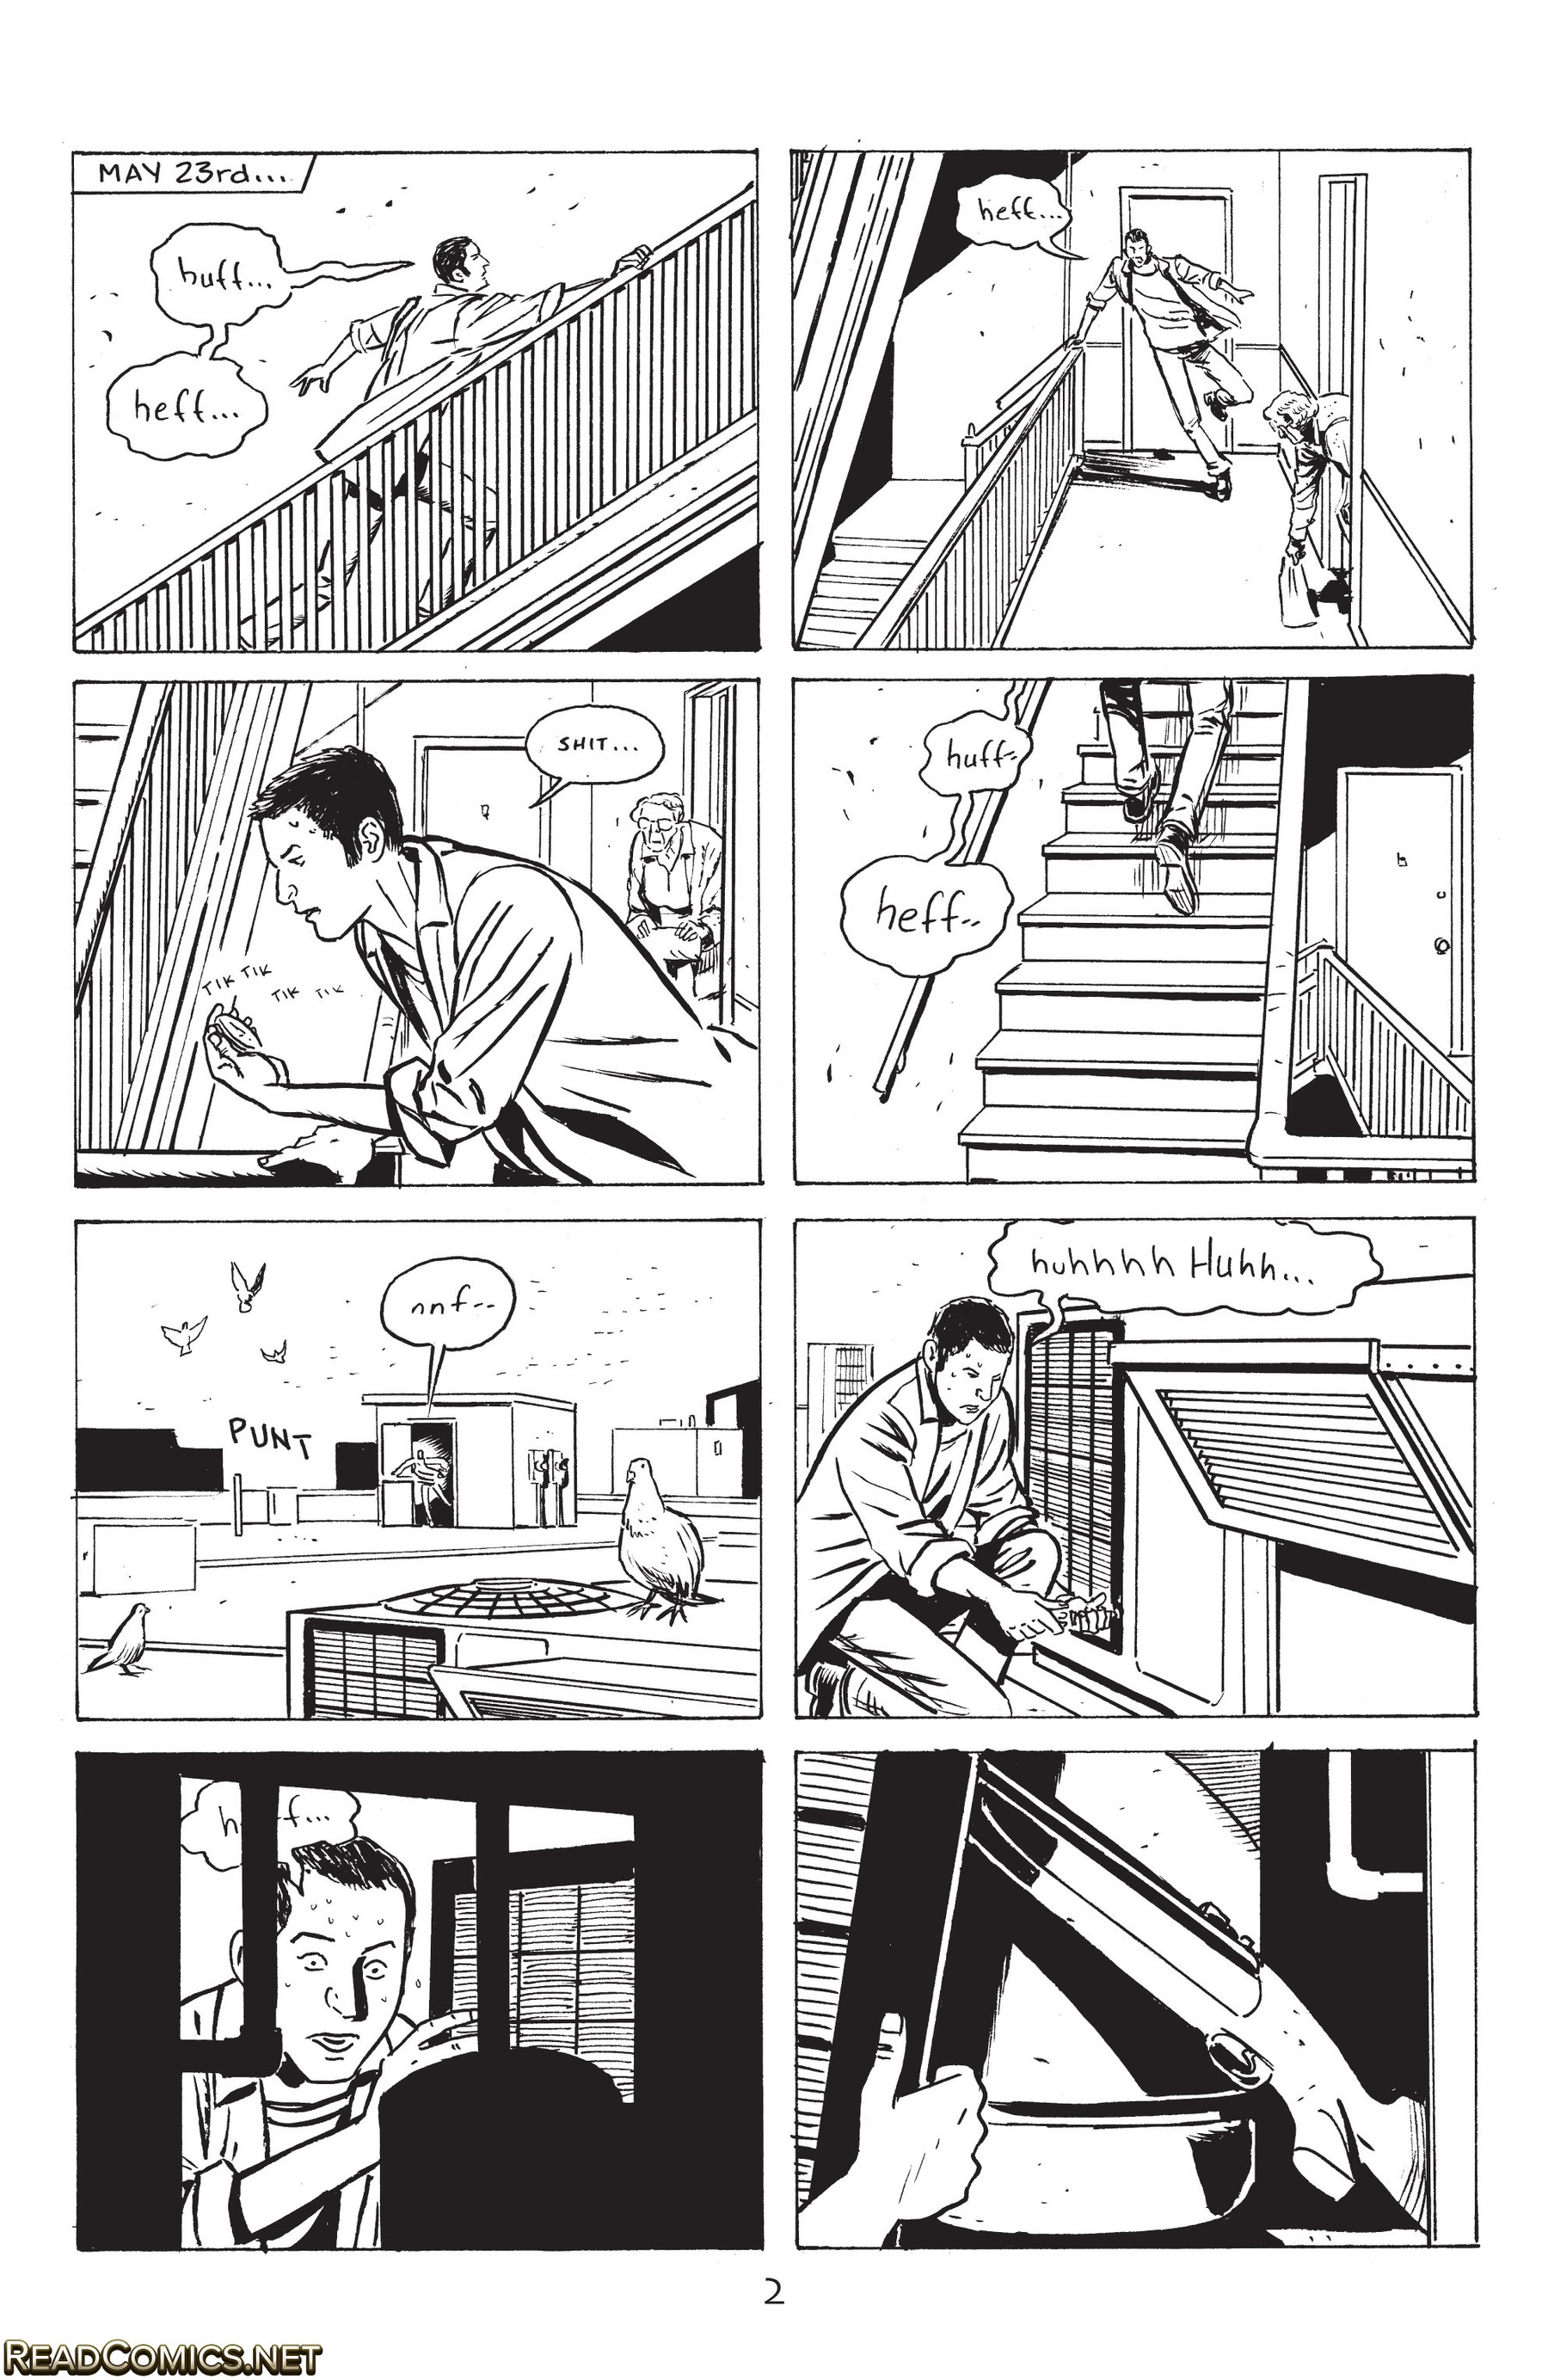 Stray Bullets: Sunshine & Roses (2015-): Chapter 1 - Page 4